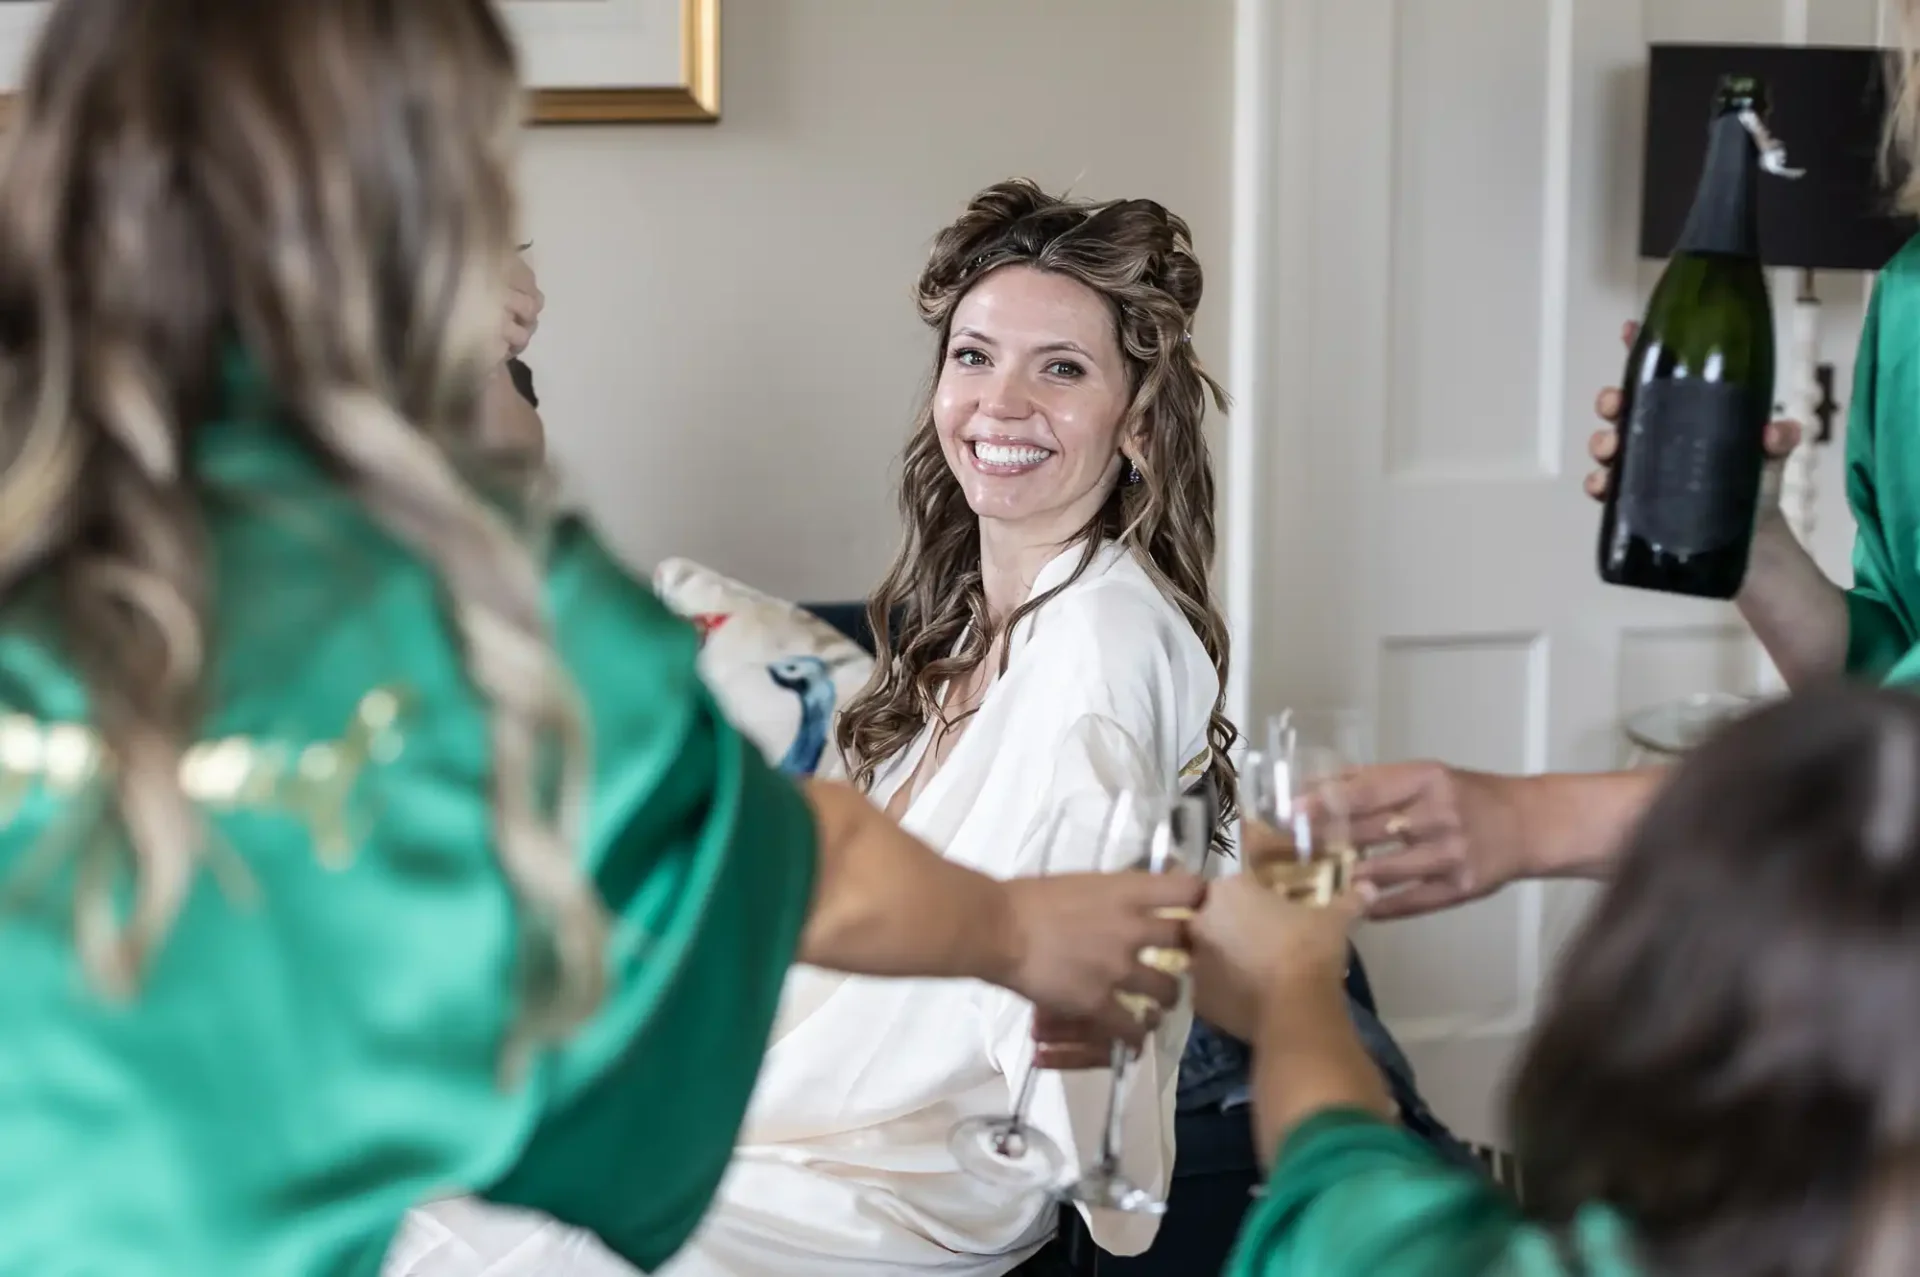 A woman in a white robe smiles as she sits, surrounded by people in green robes holding champagne glasses, about to make a toast.